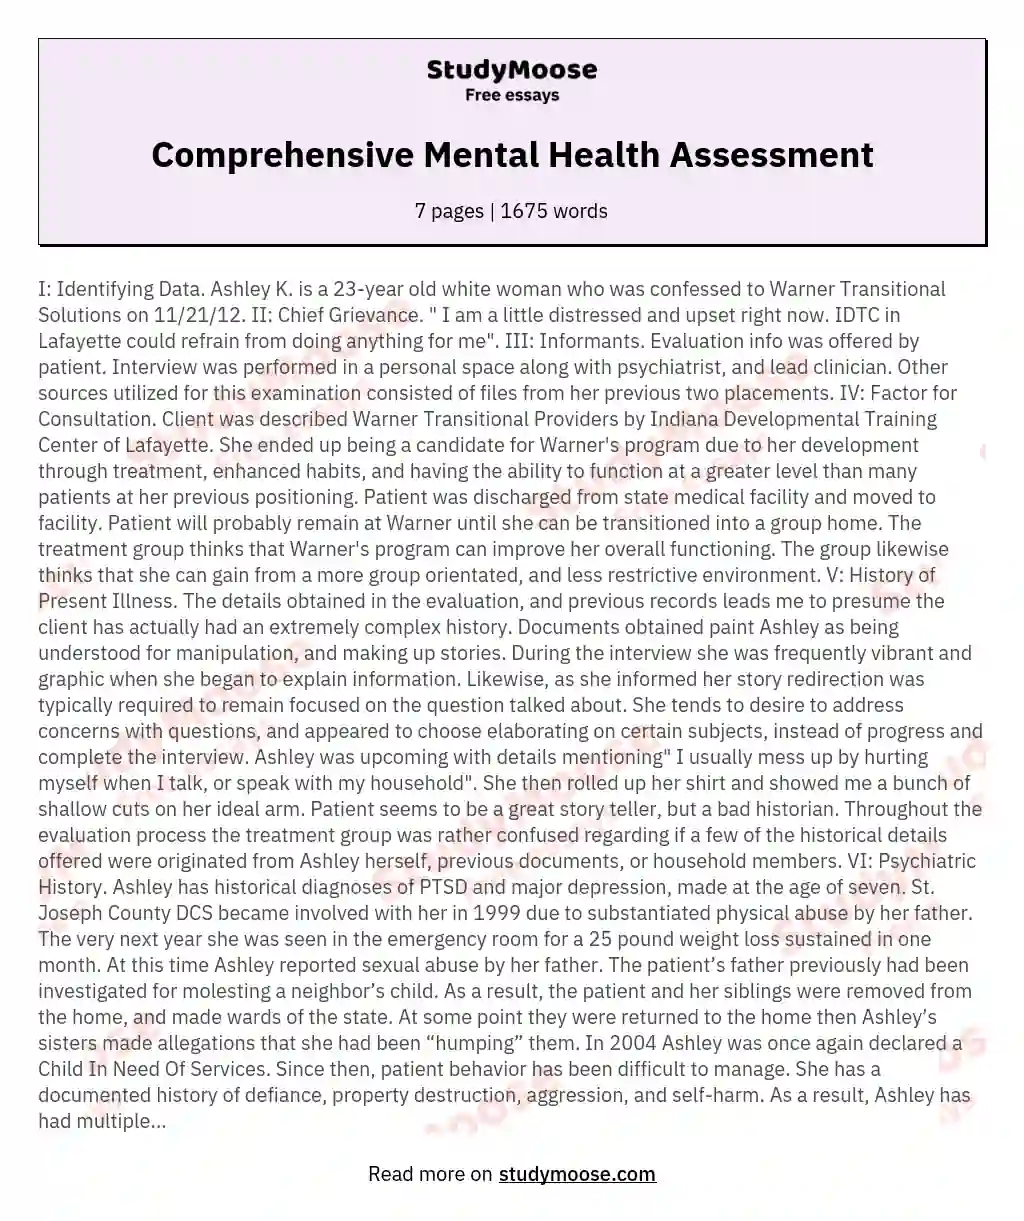 personal health assessment paper